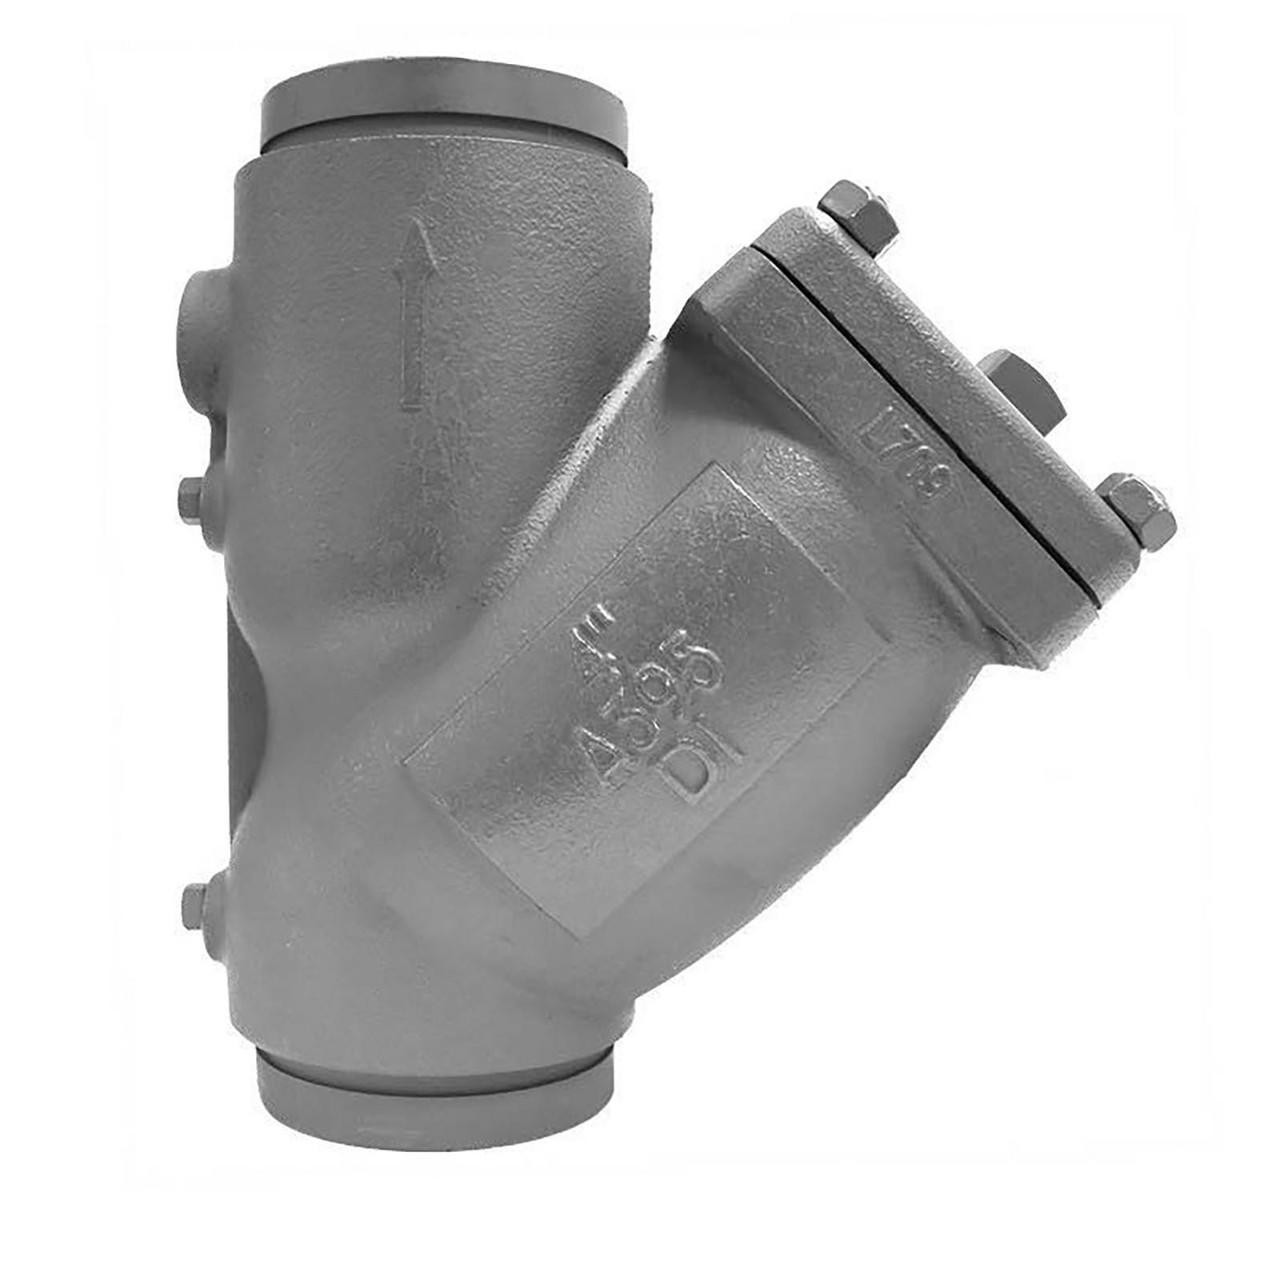 Titan Flow Control YS58DG0200 2 Inch Y Strainer, Ductile Iron, ASME Class  300, Grooved Ends, Epoxy Painted, Gasketed Caps, Plugged Blow-off